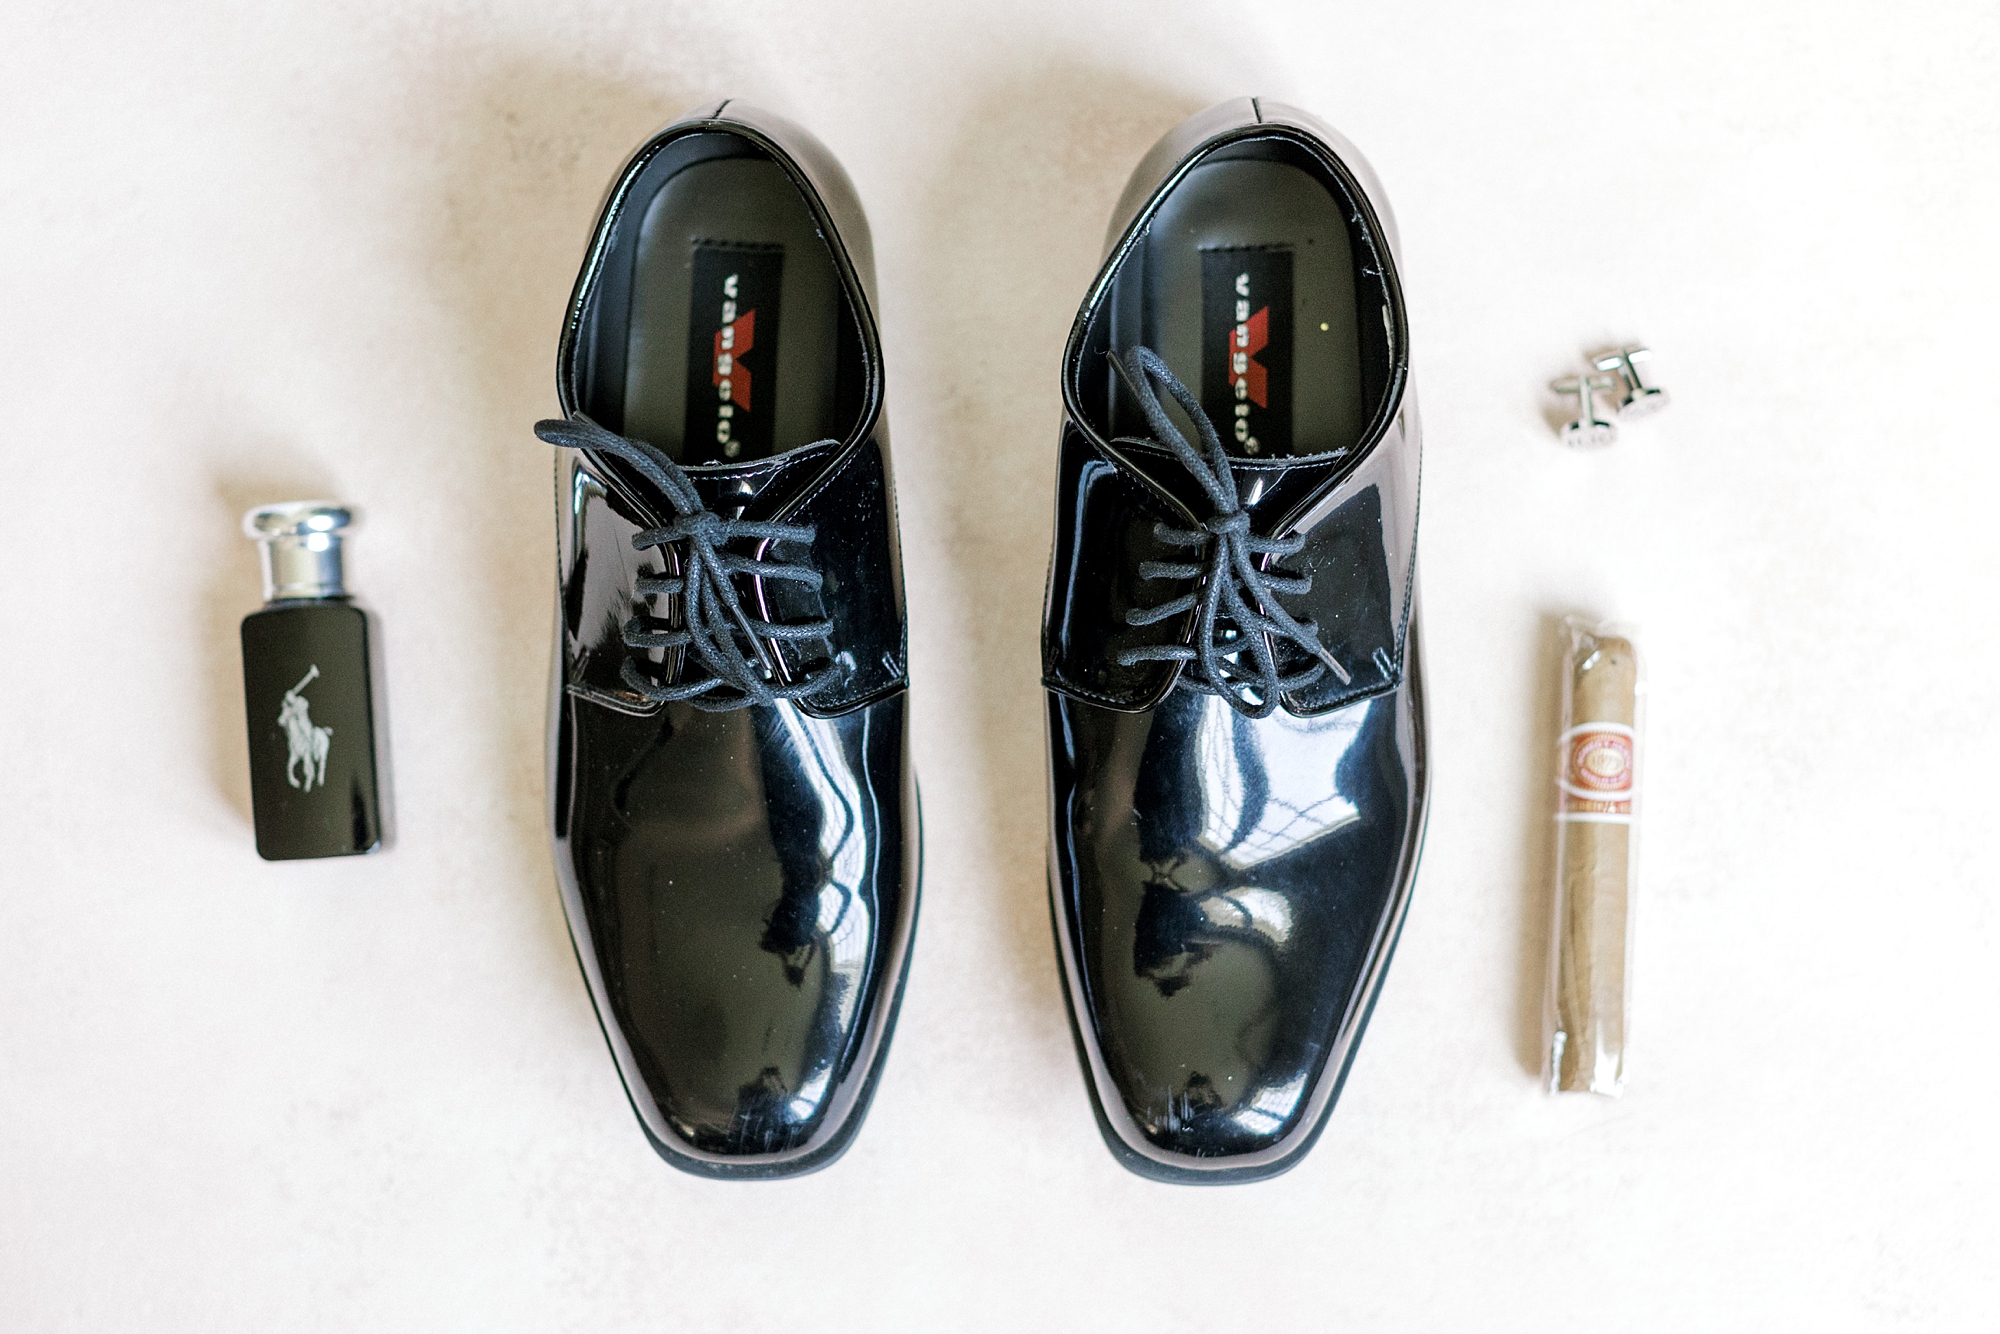 groom's shiny black shoes and cologne before NJ wedding